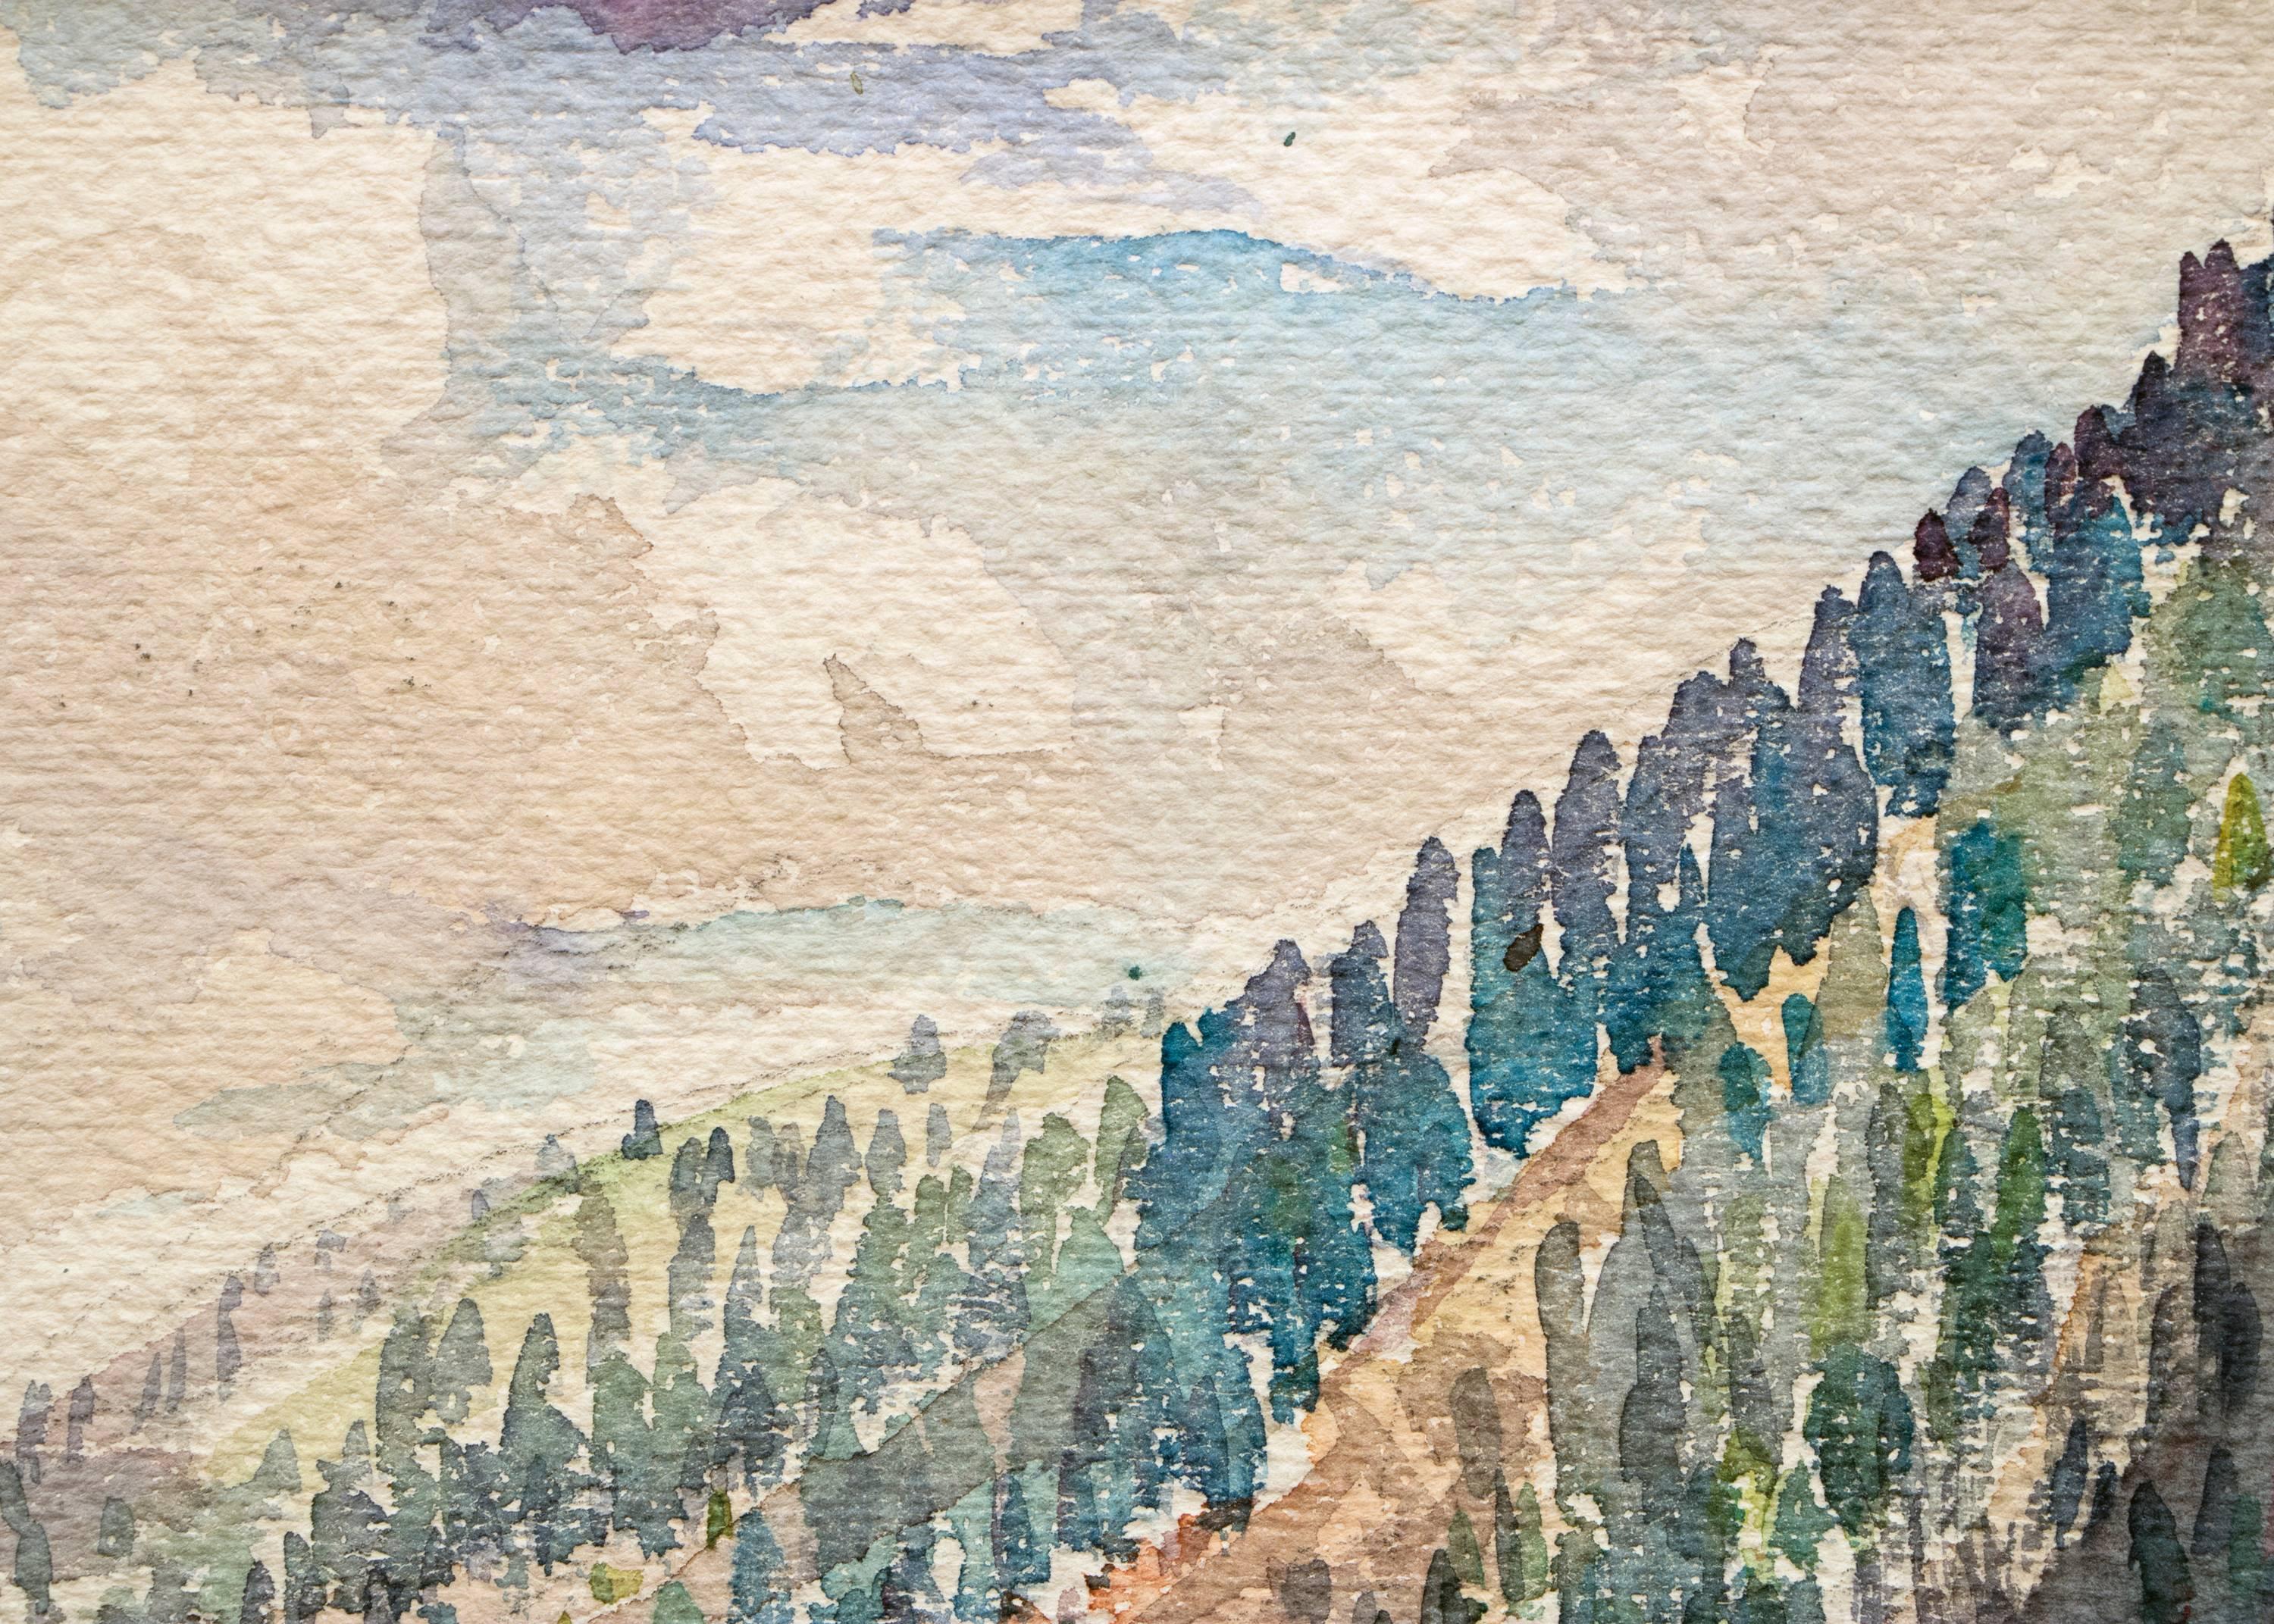 Watercolor on paper painting of Cameron's Cove outside of Colorado Springs, Colorado by Charles Ragland Bunnell from the 1930s. Scenic mountain landscape painted in colors of green, blue, and browns. Housed in a custom frame with archival materials,